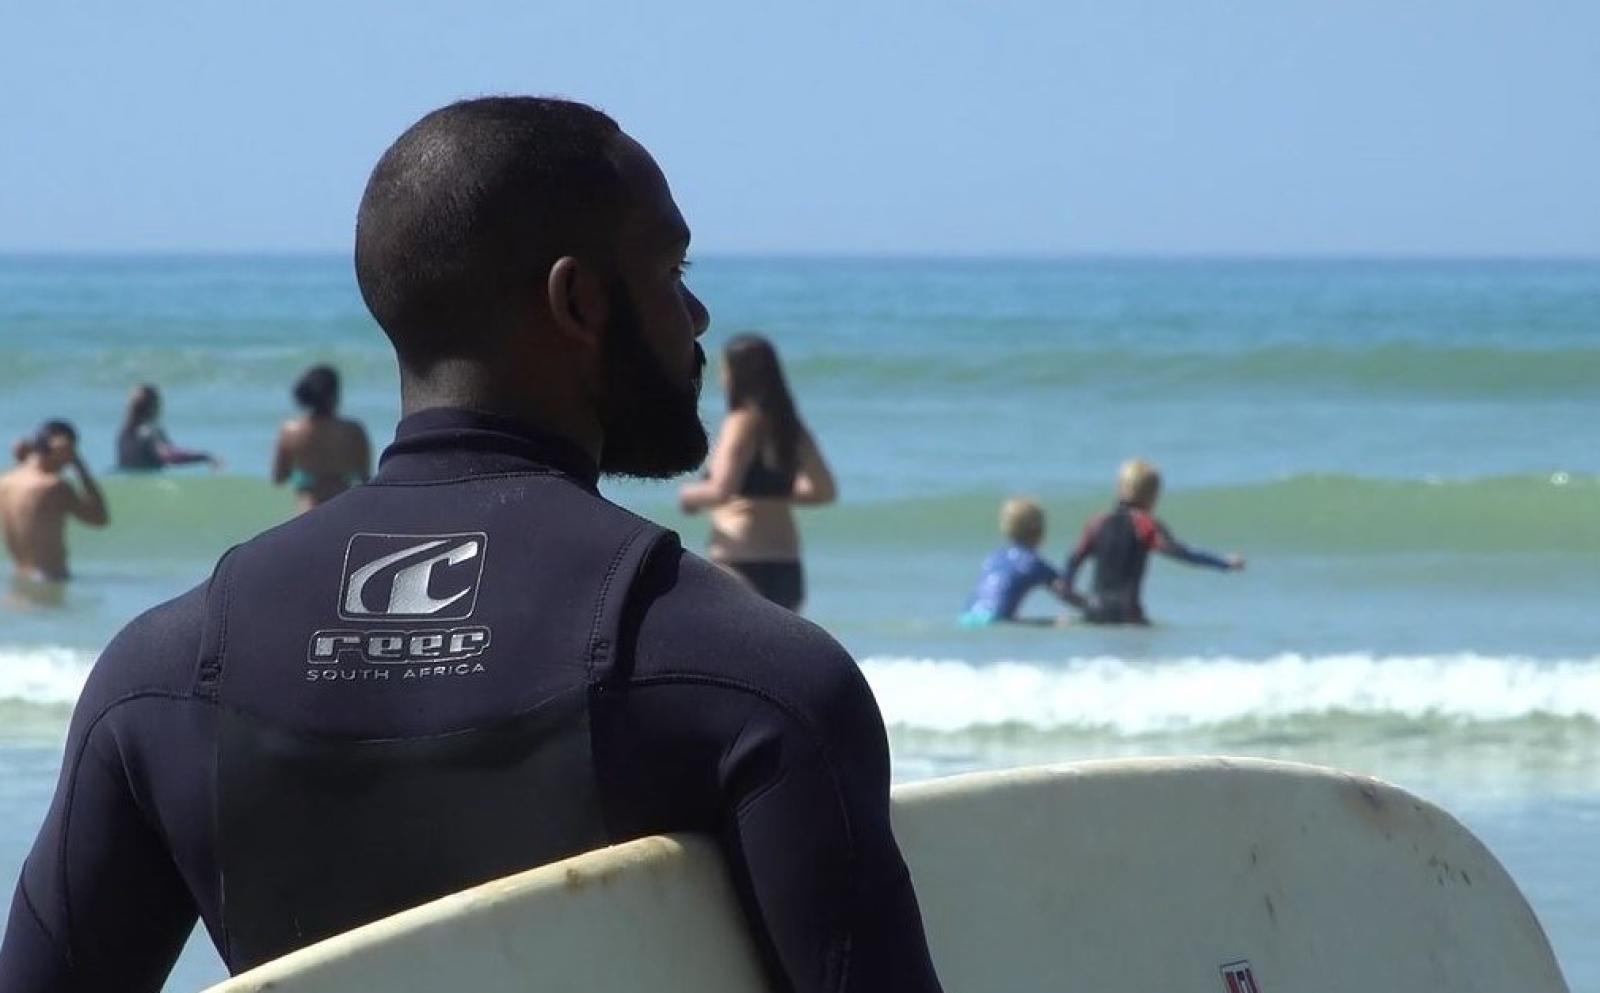 Shuan watching over the kids as they practice their surfing skills on Muizenberg beach